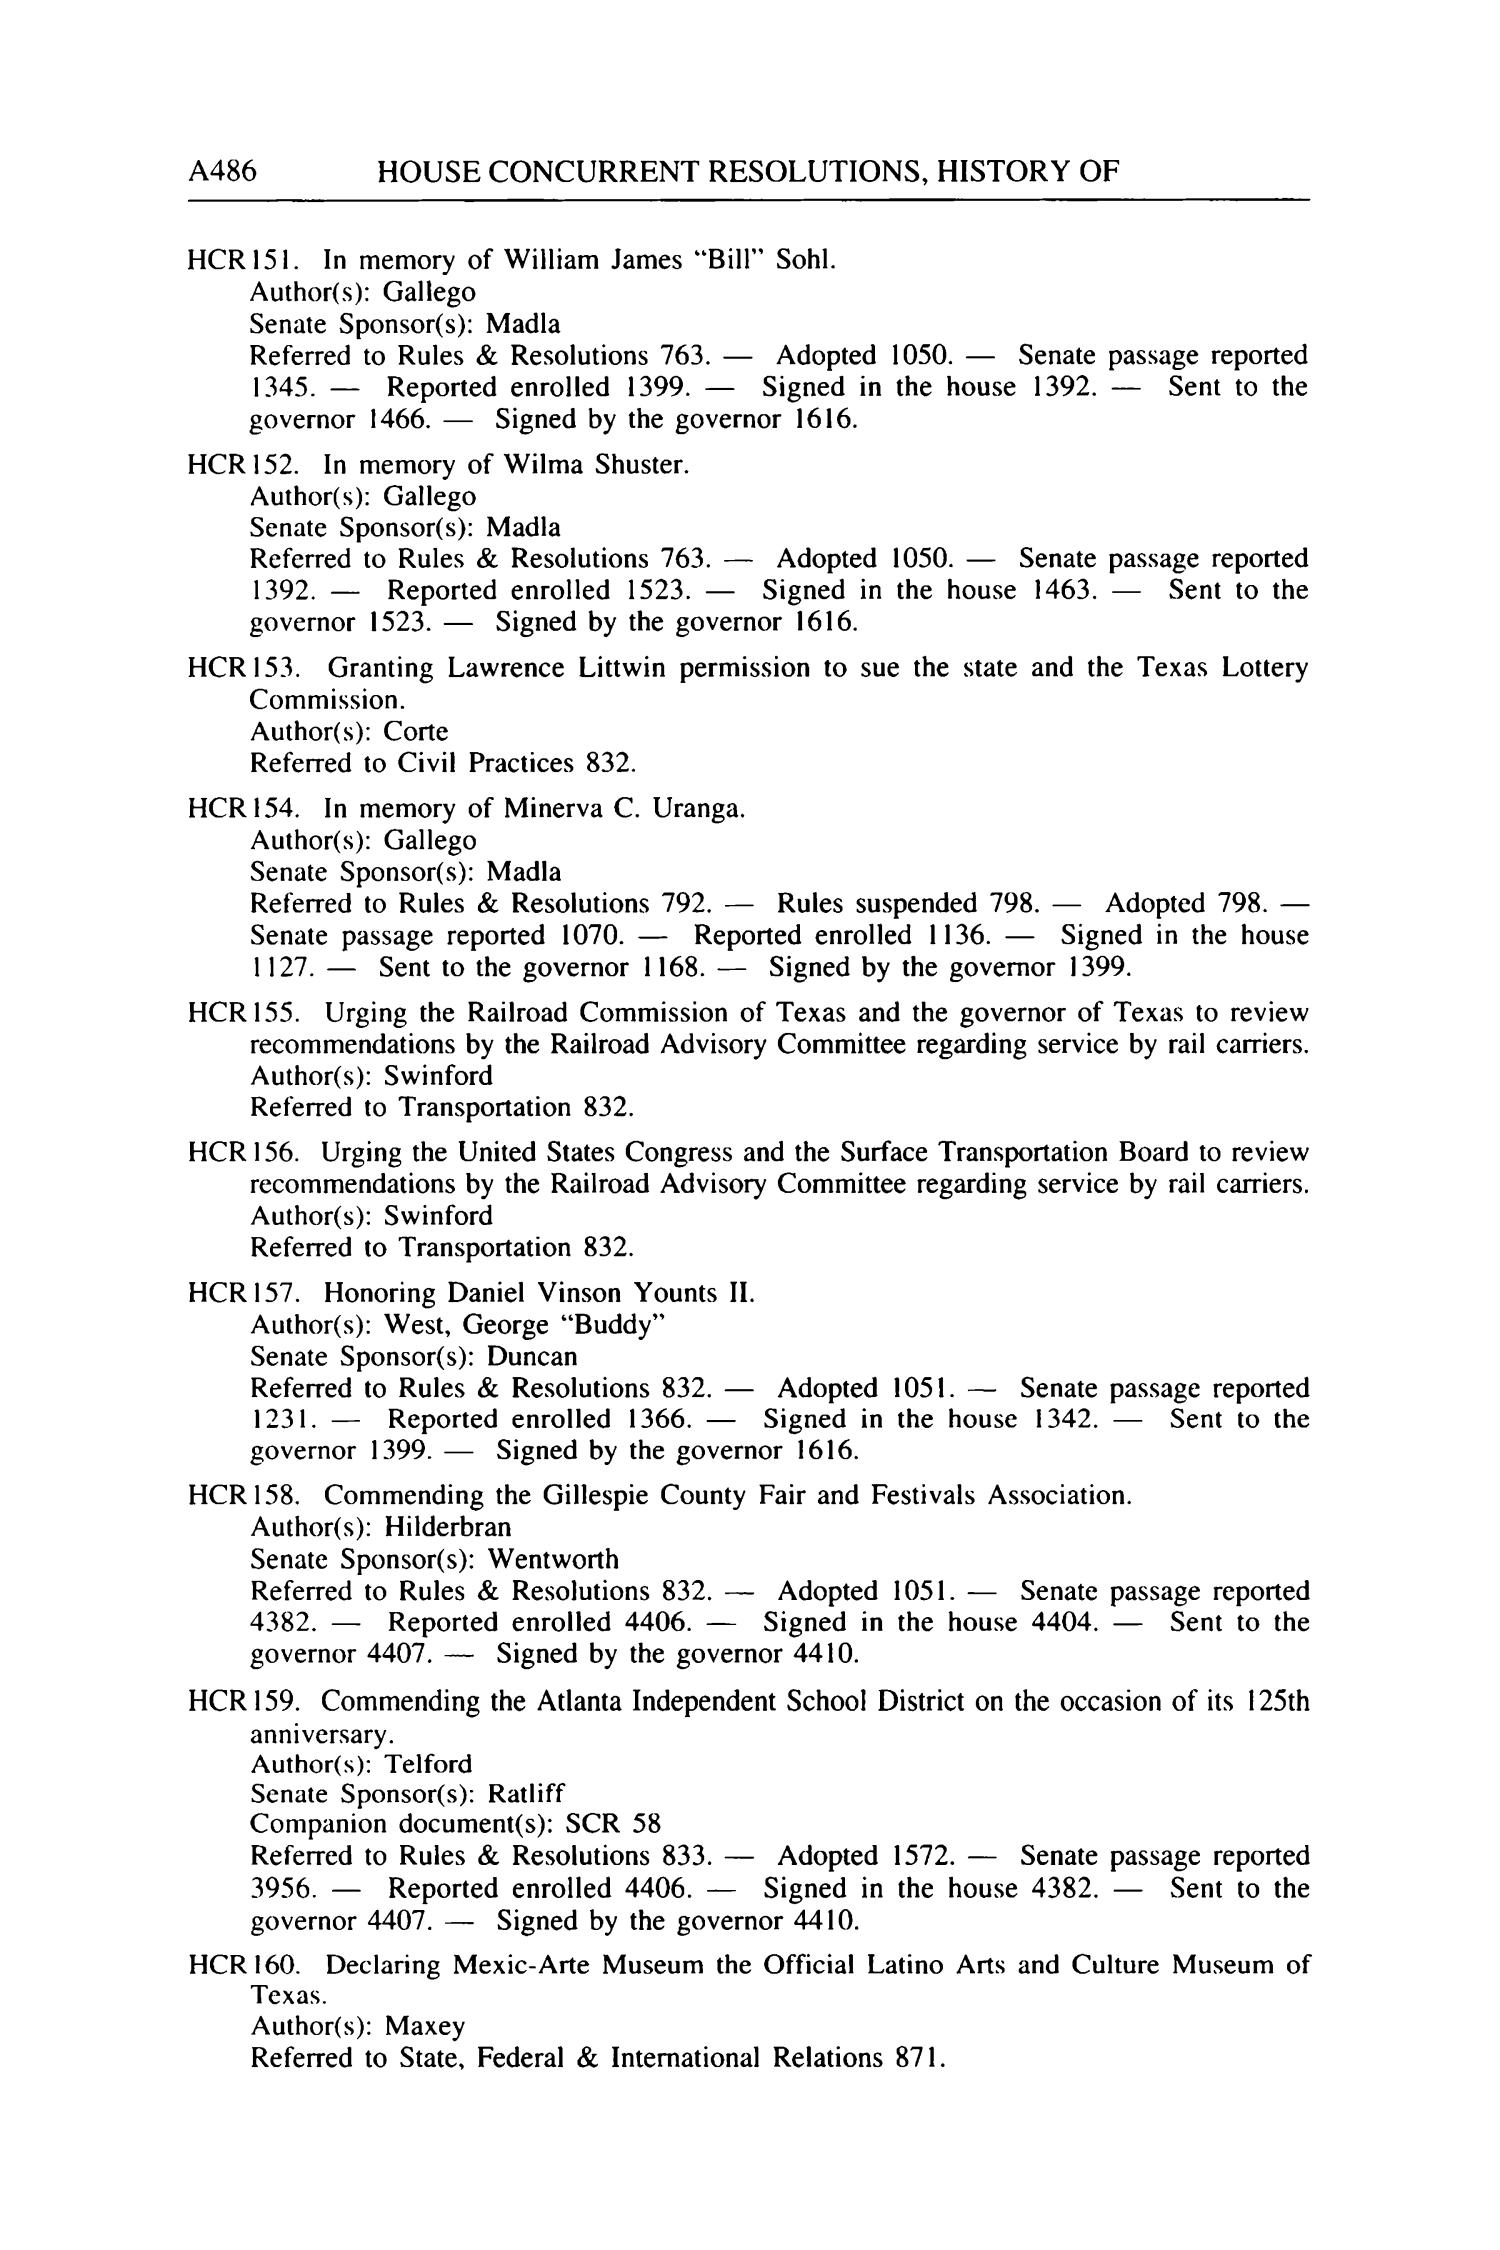 Journal of the House of Representatives of the Regular Session of the Seventy-Sixth Legislature of the State of Texas, Volume 5
                                                
                                                    A486
                                                